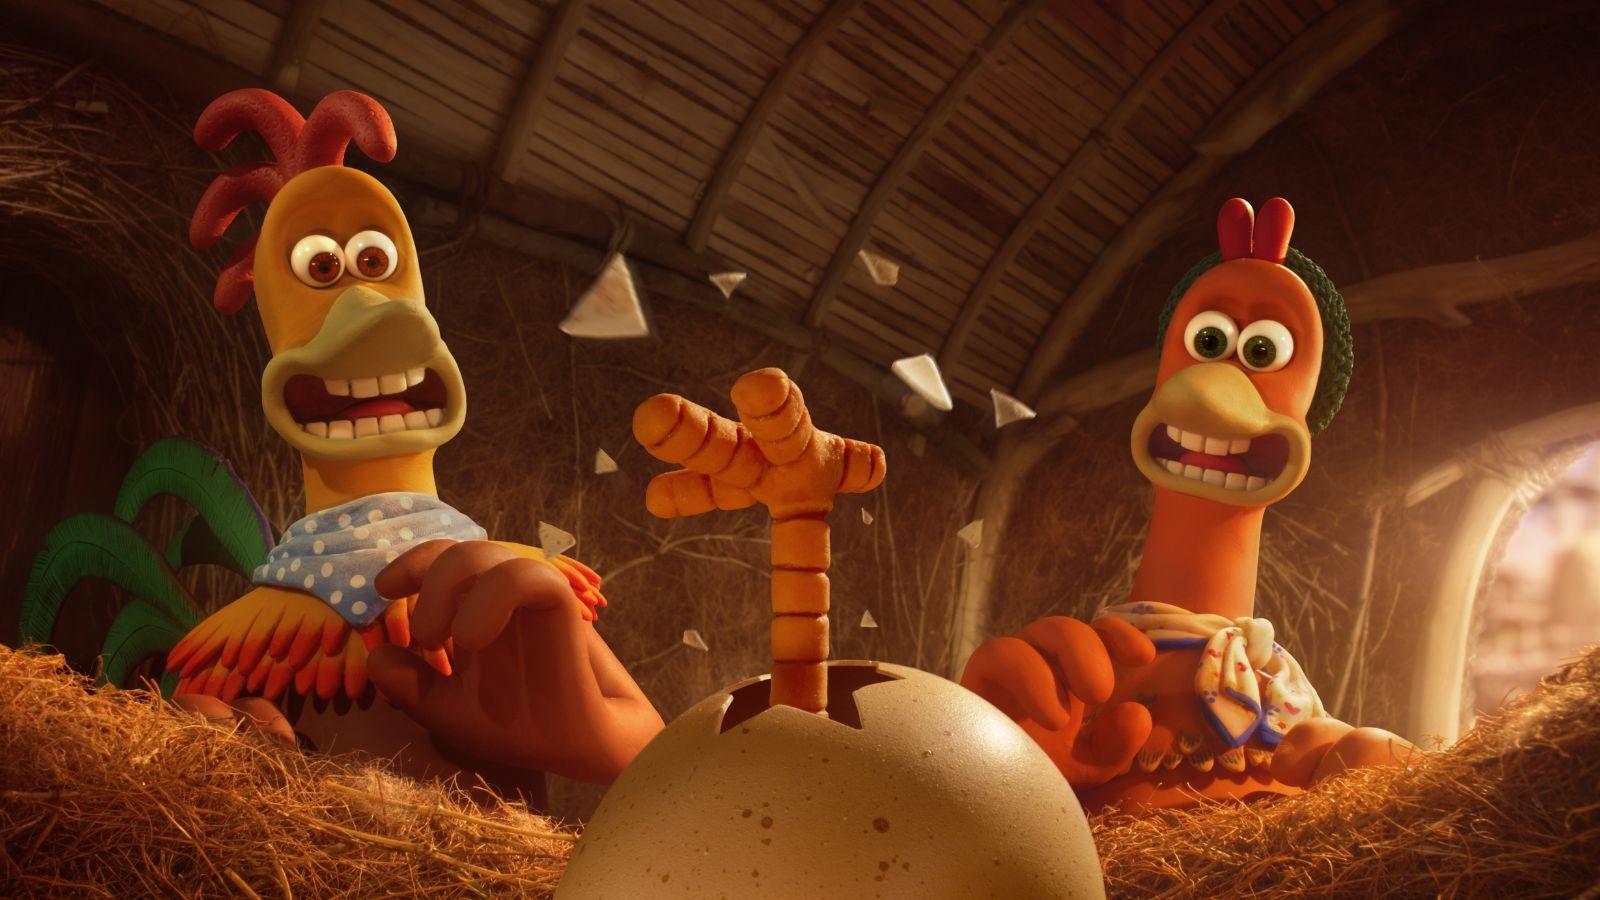 Rocky, Ginger, and their new baby in Chicken Run 2.